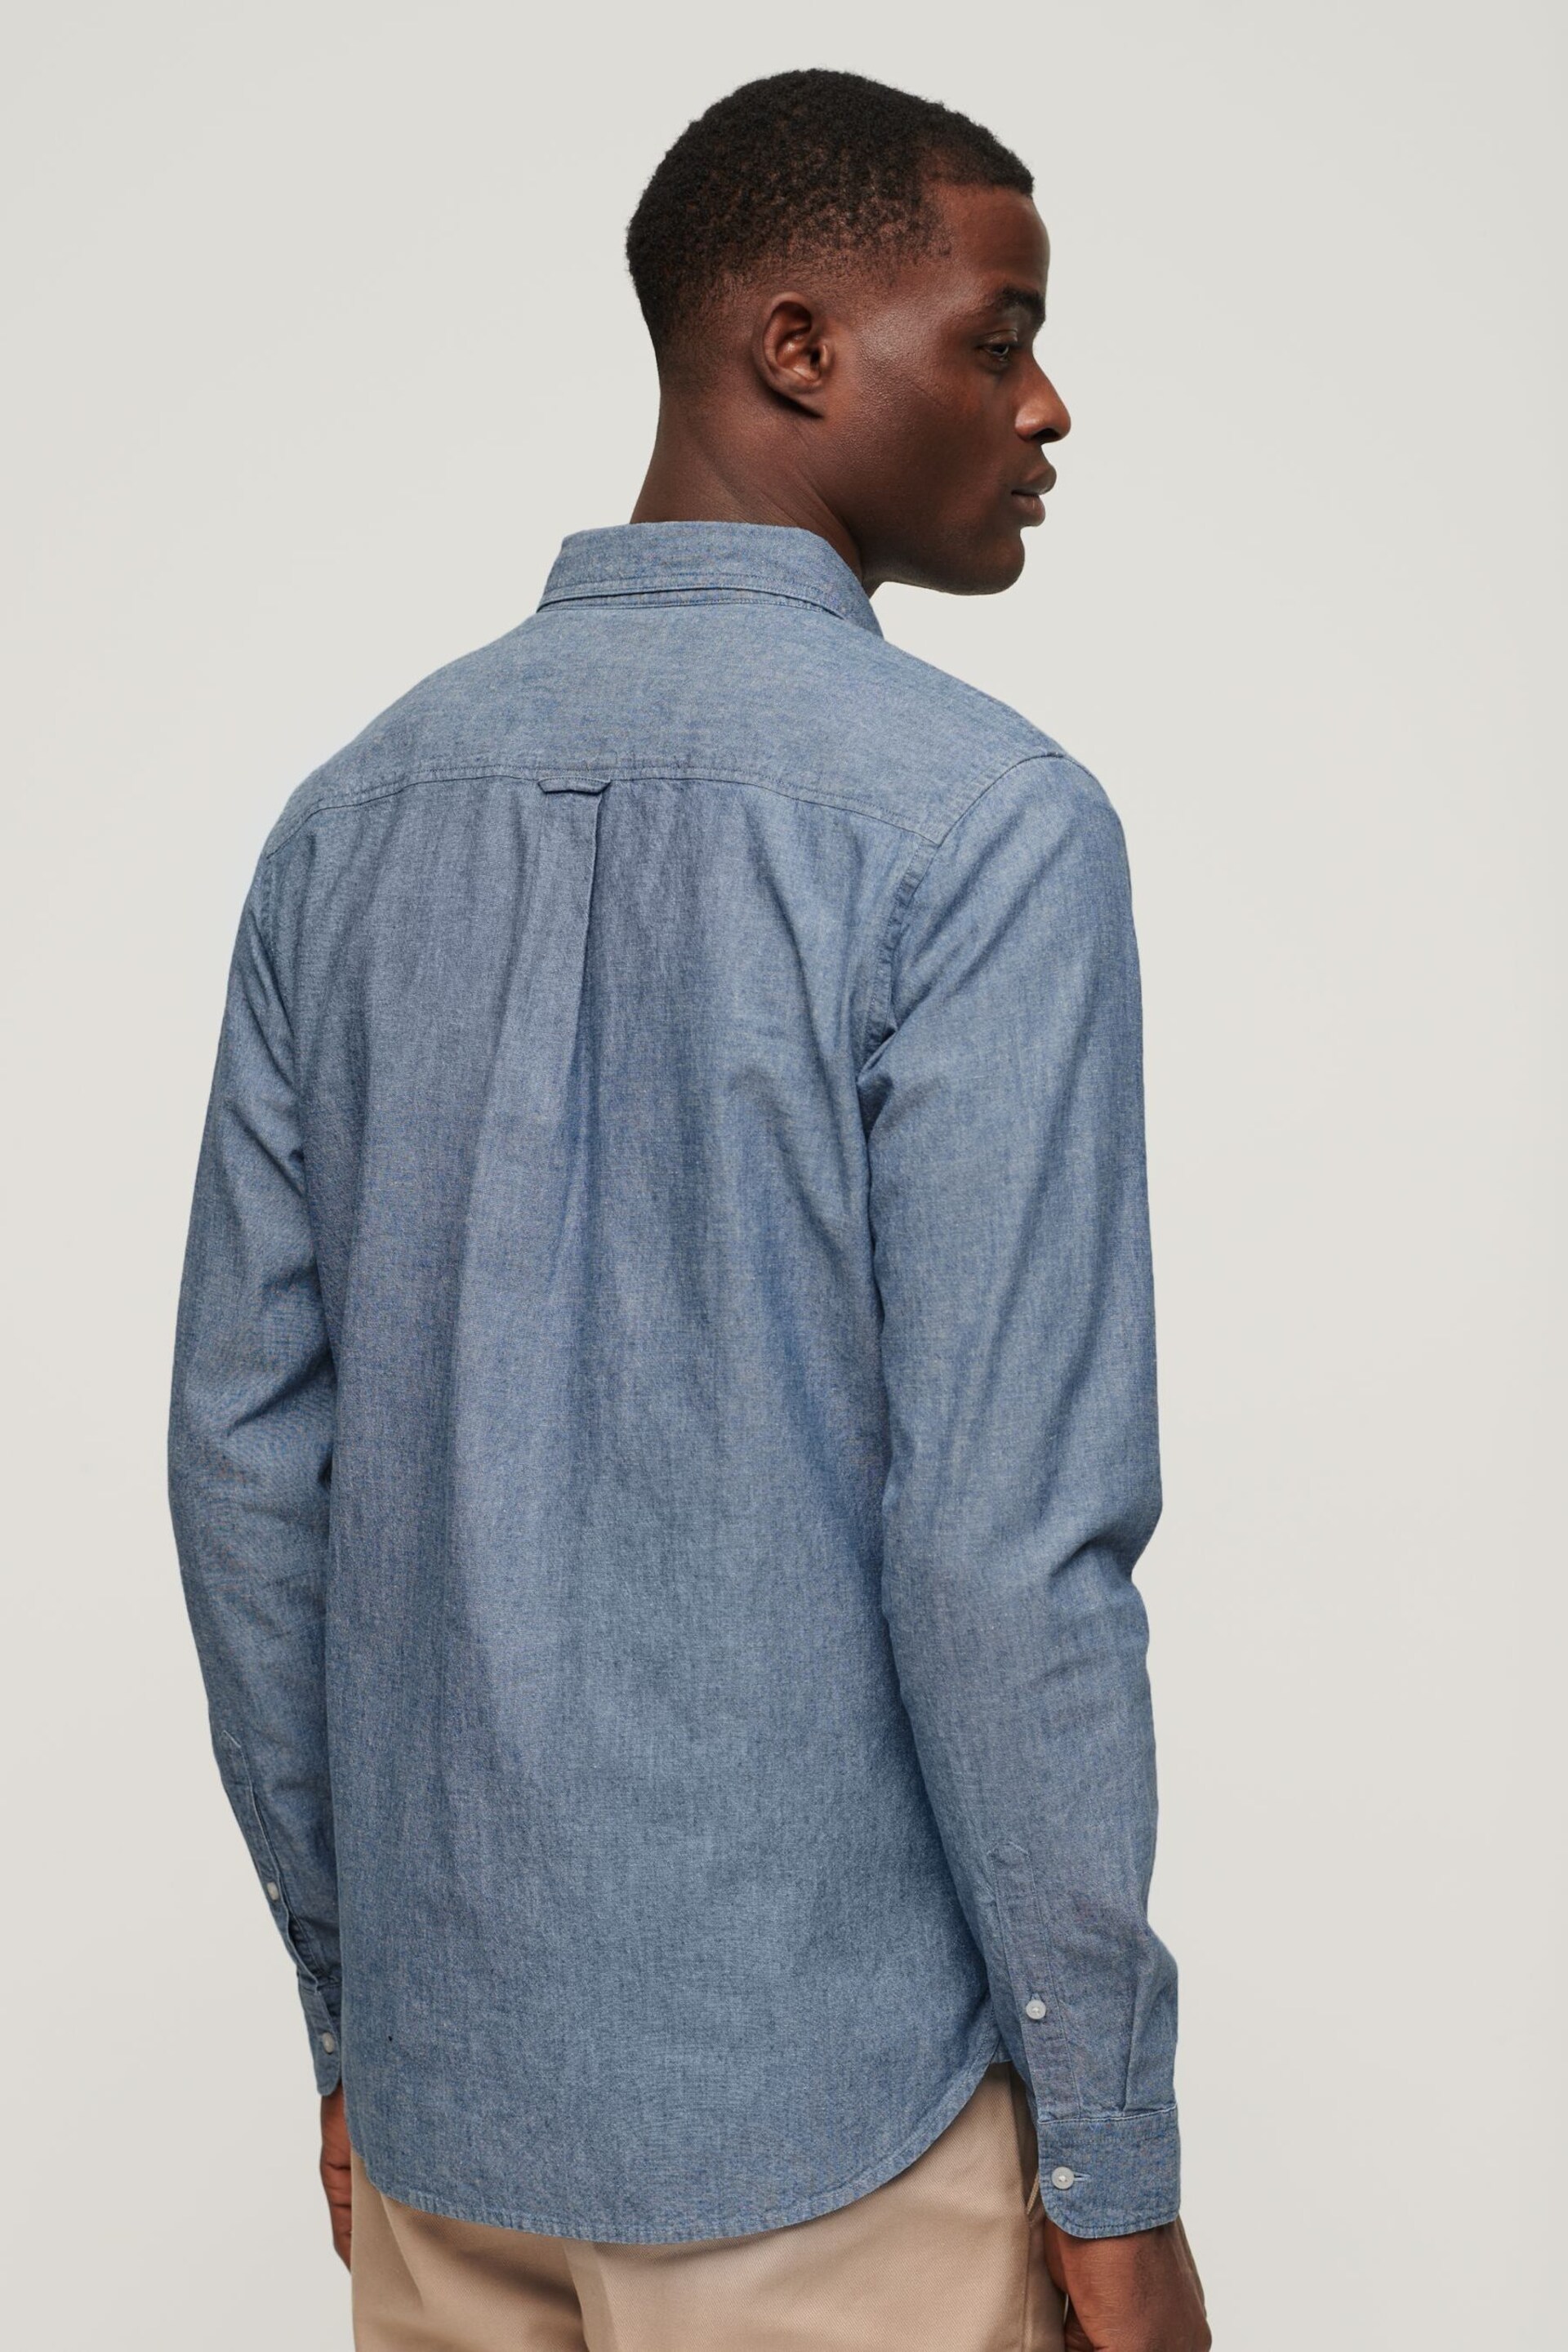 Superdry Blue Cotton Long Sleeved Oxford Shirt - Image 2 of 4